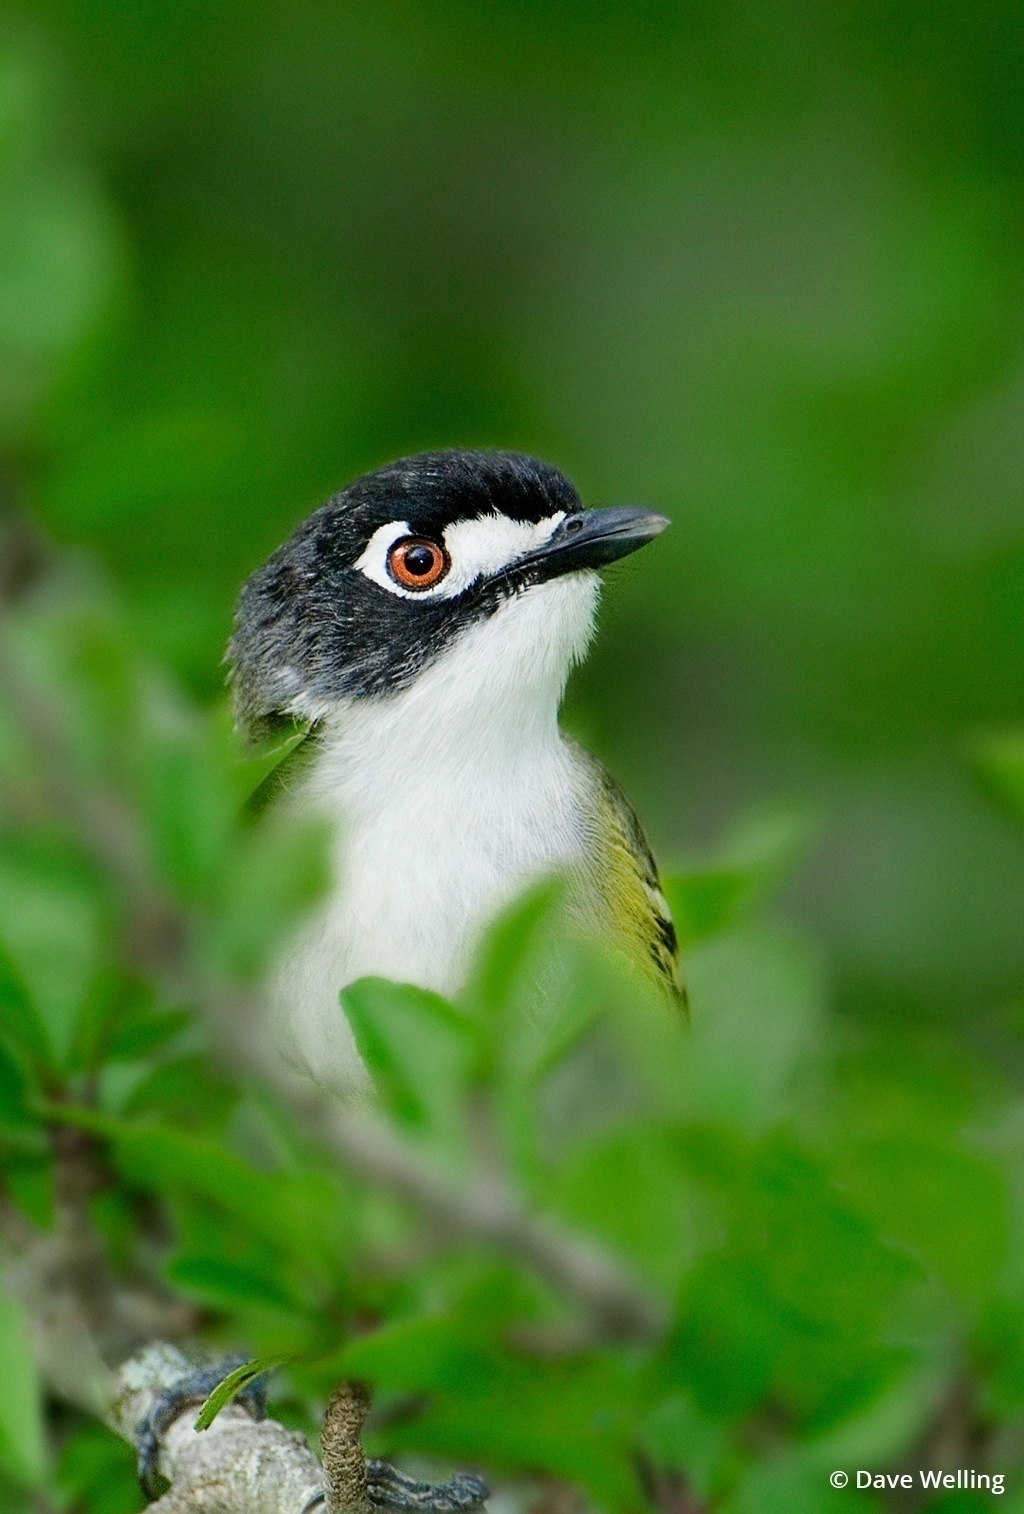 Image of a black-capped vireo.